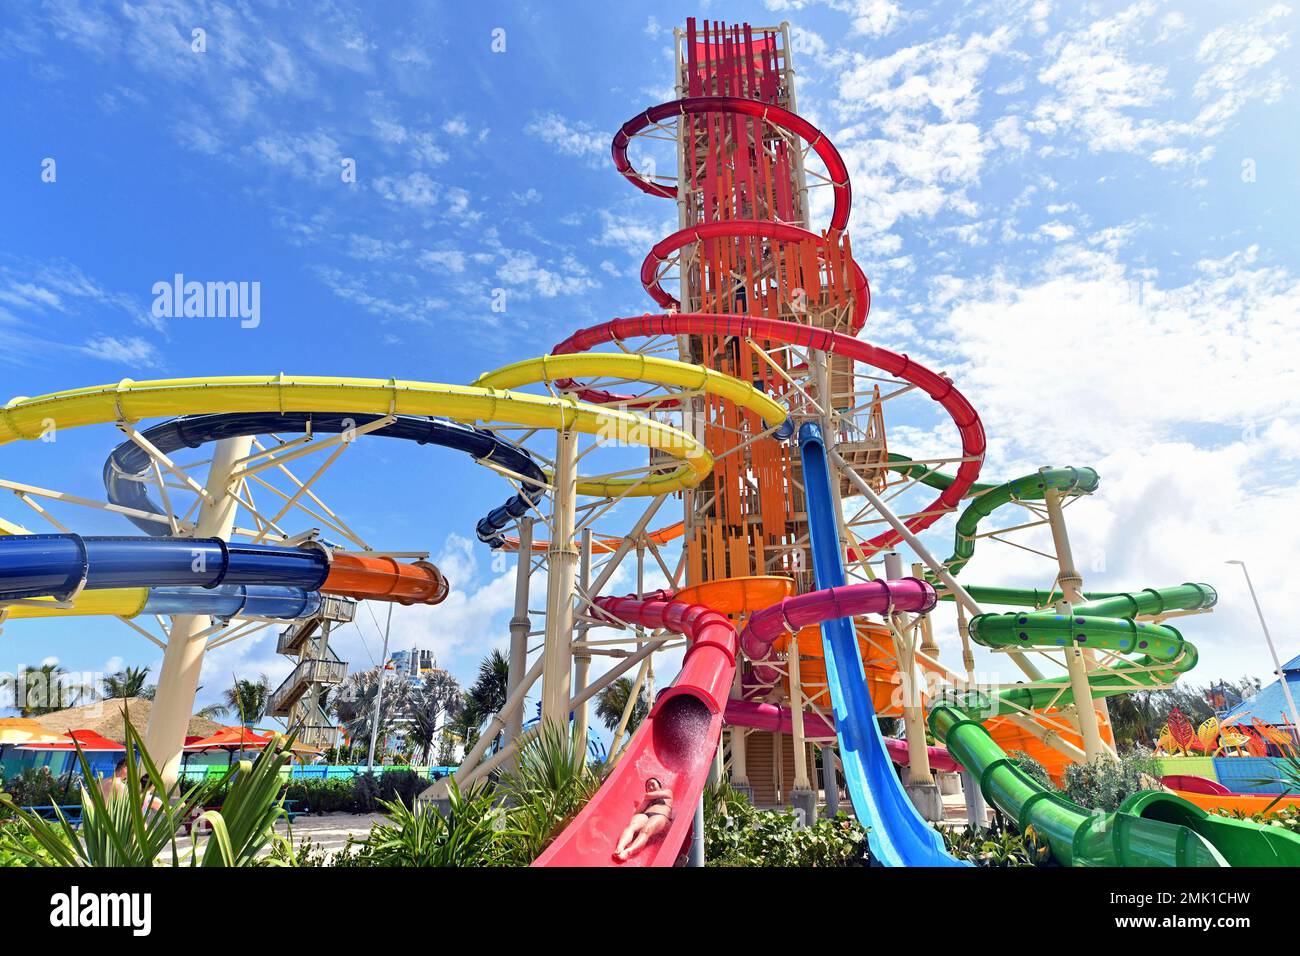 The Tallest Water Slides in North America